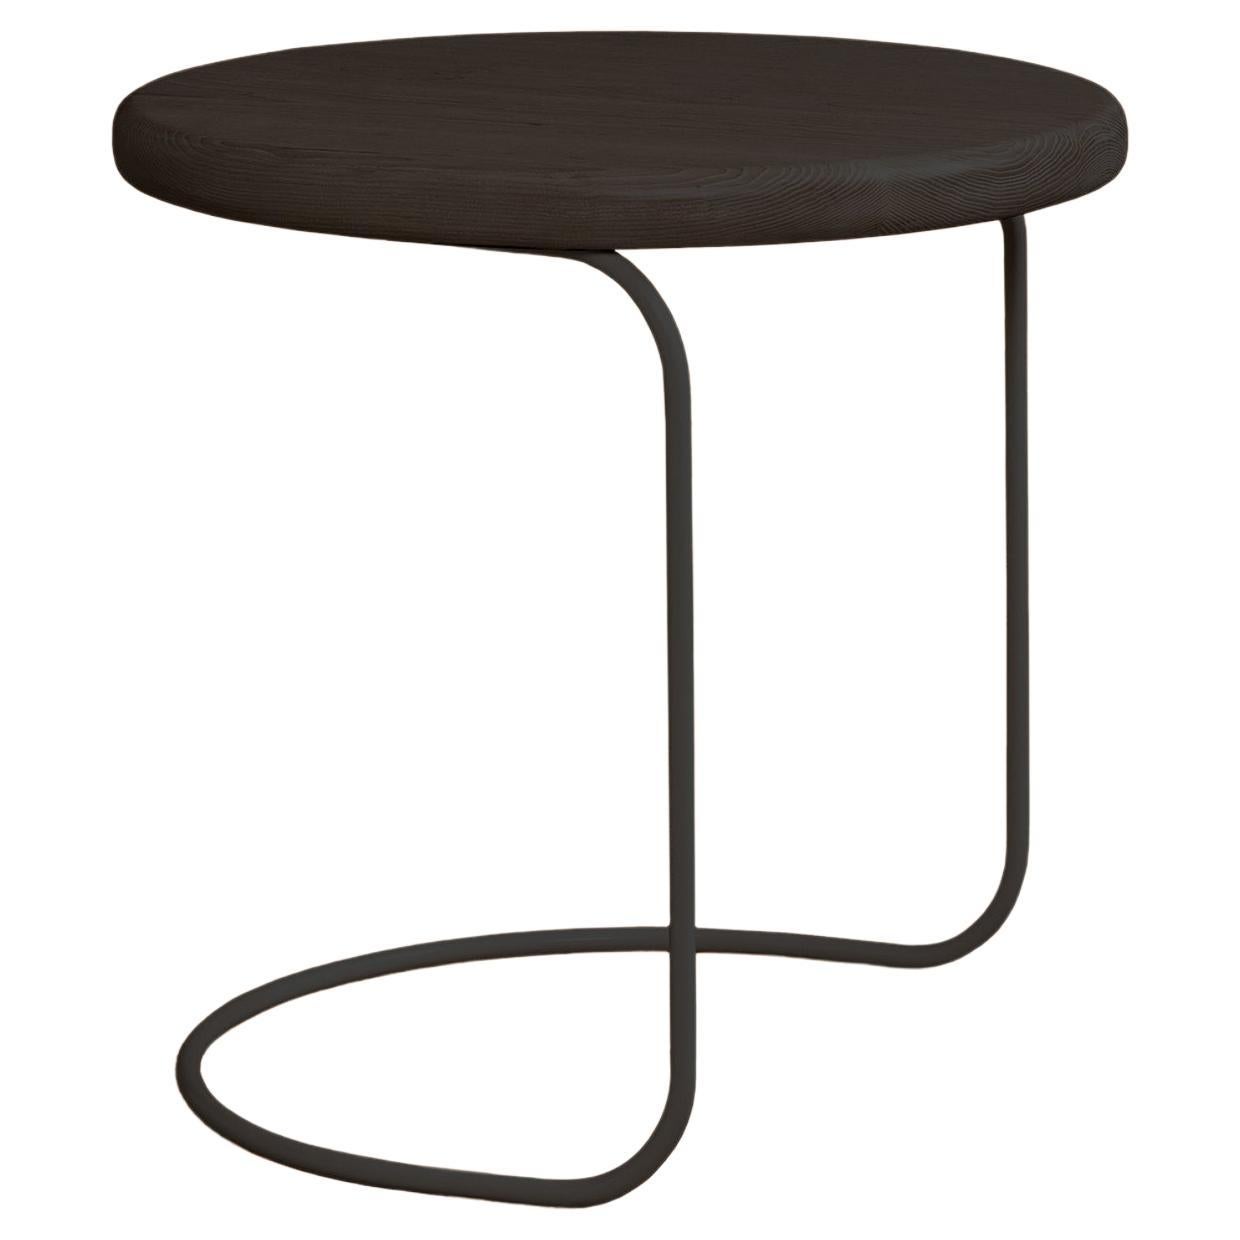 Minimalist Contemporary Wood and Metal Round Side Table